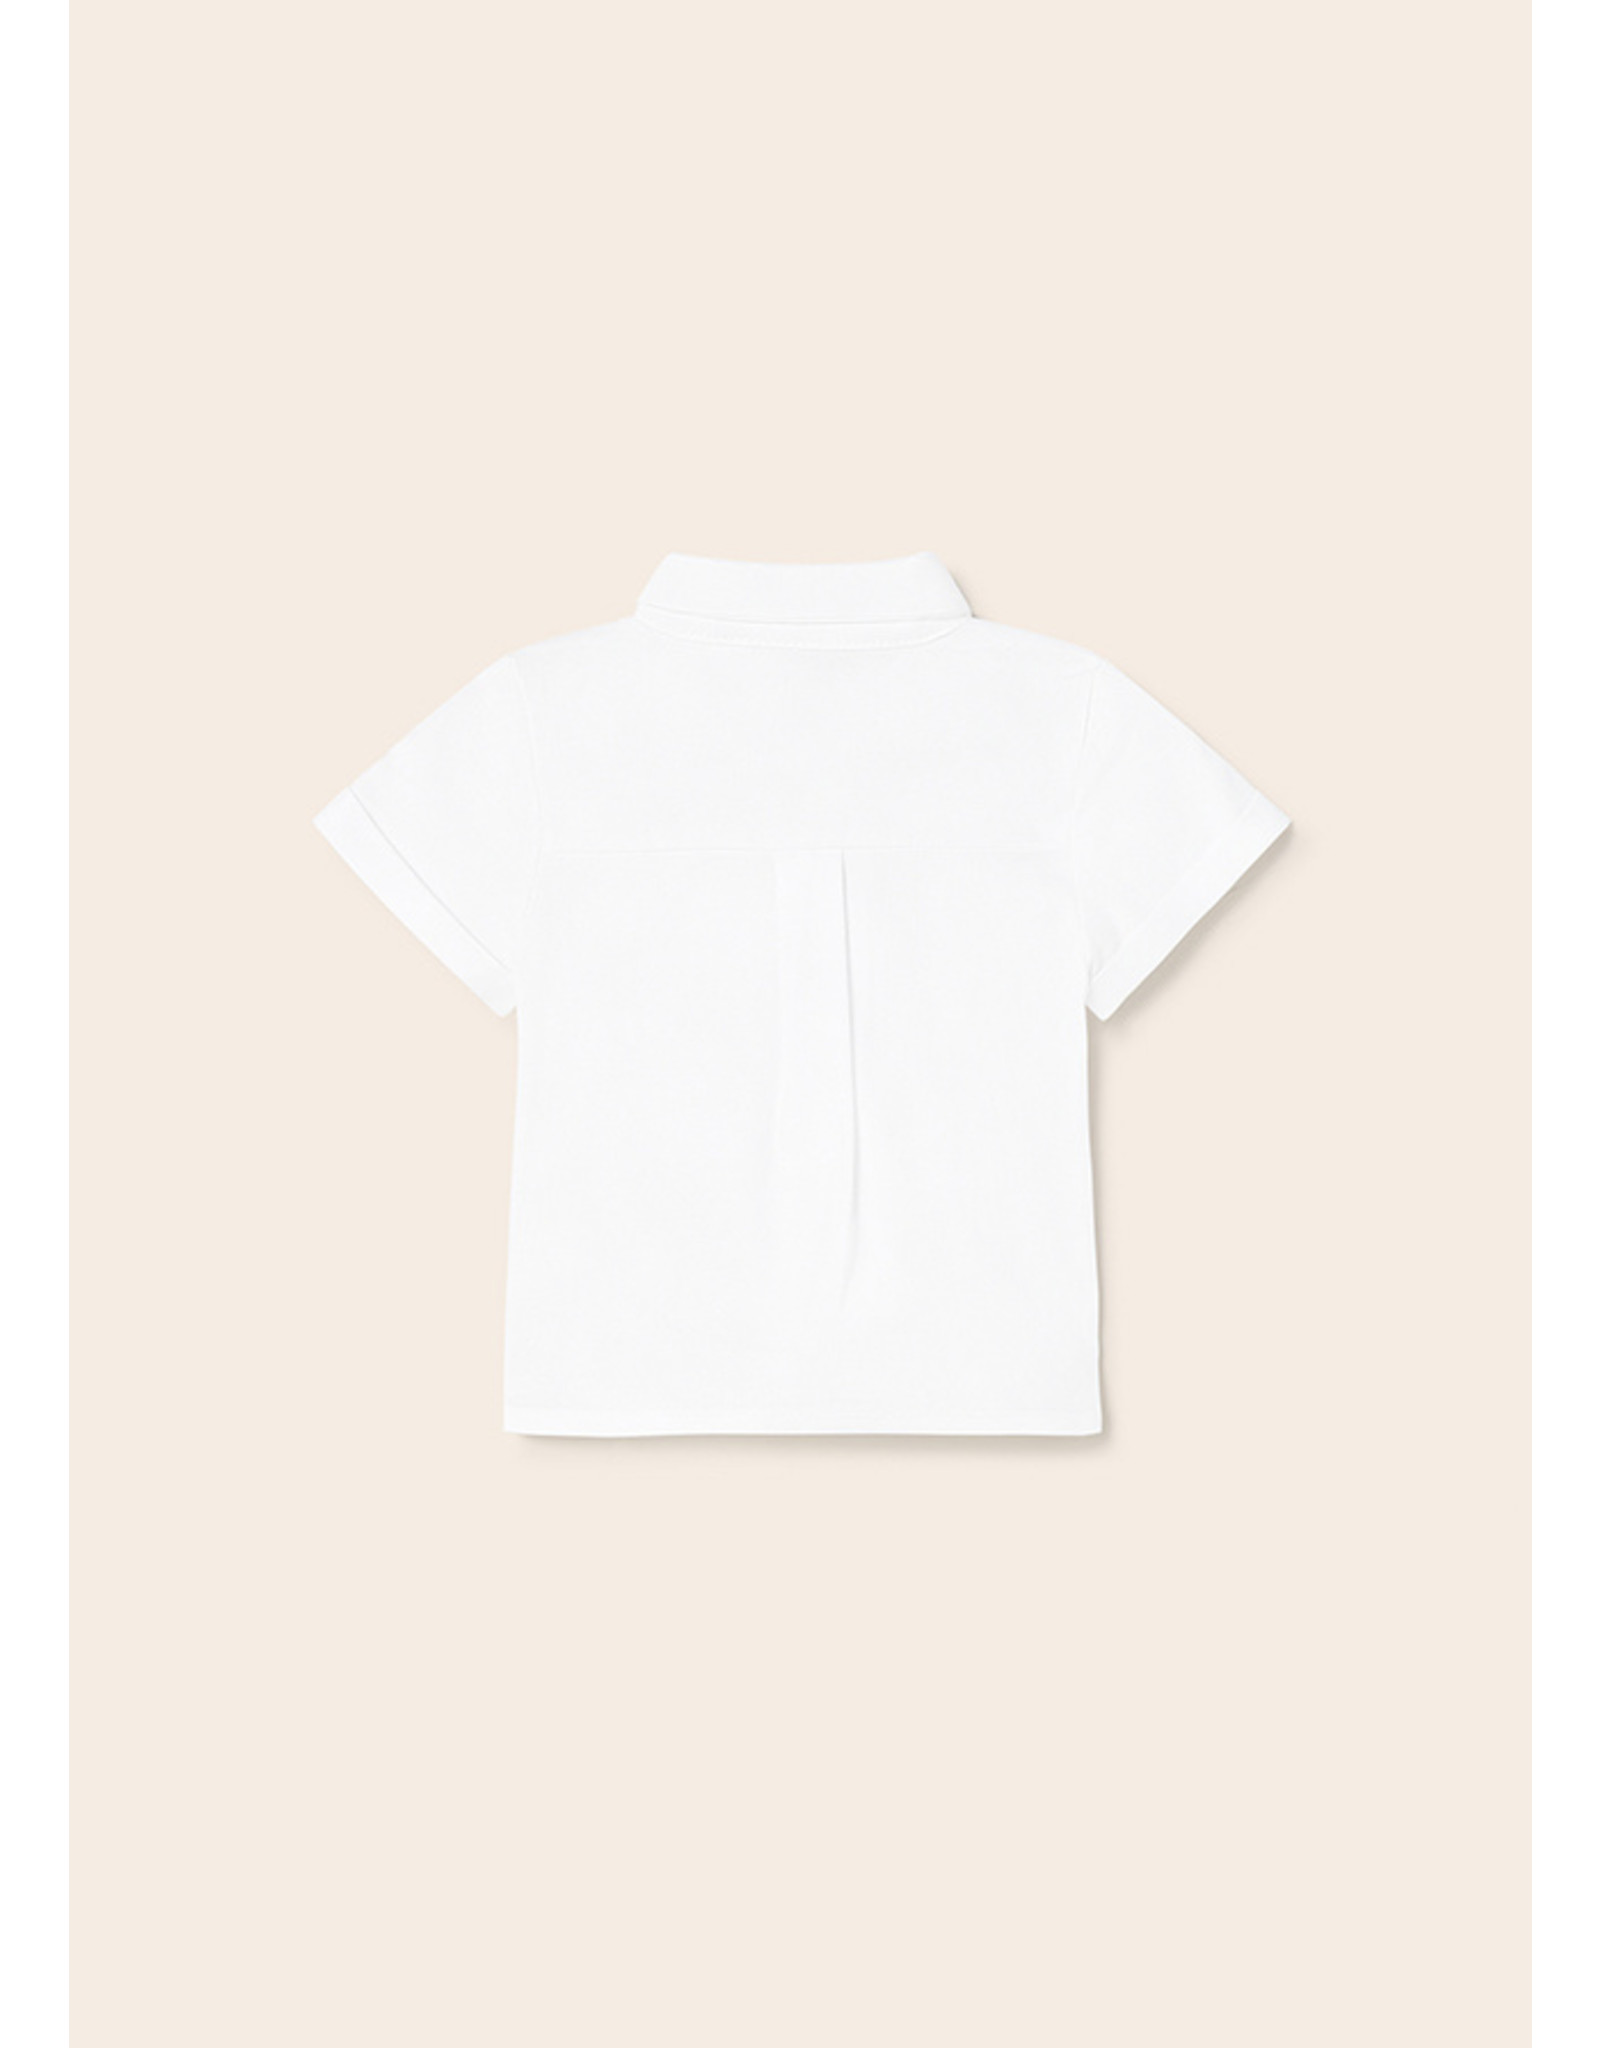 Mayoral White Short Sleeve Button Baby Shirt